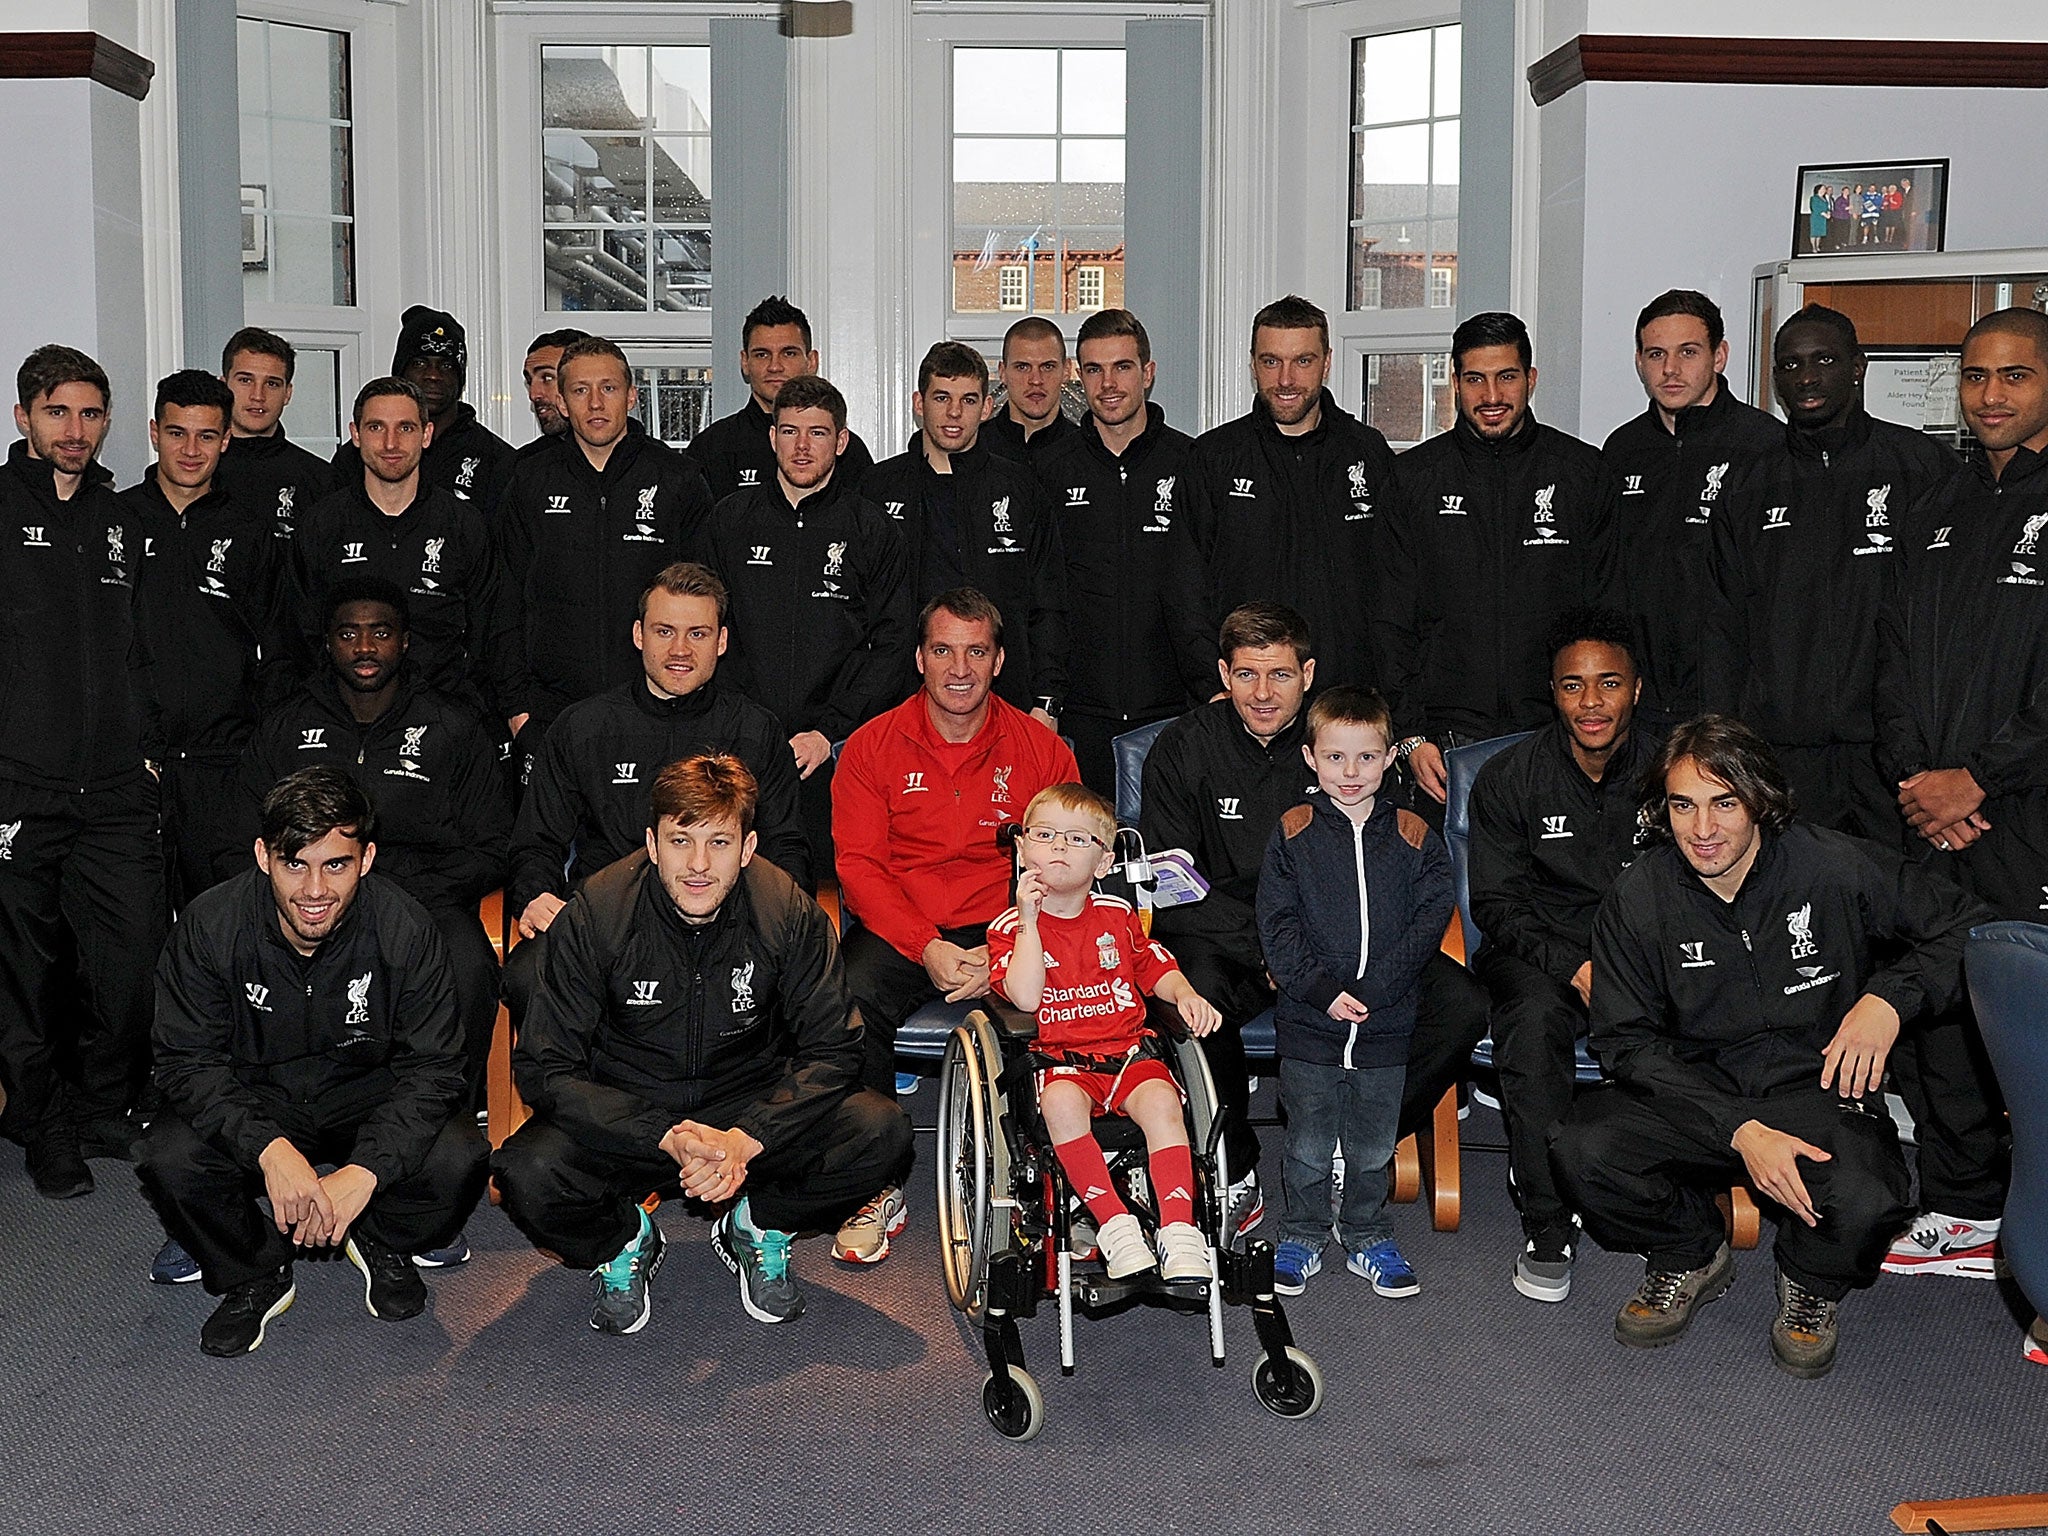 The entire Liverpool squad pictured alongside Brendan Rodgers and two young boys at Alder Hey Children's Hospital